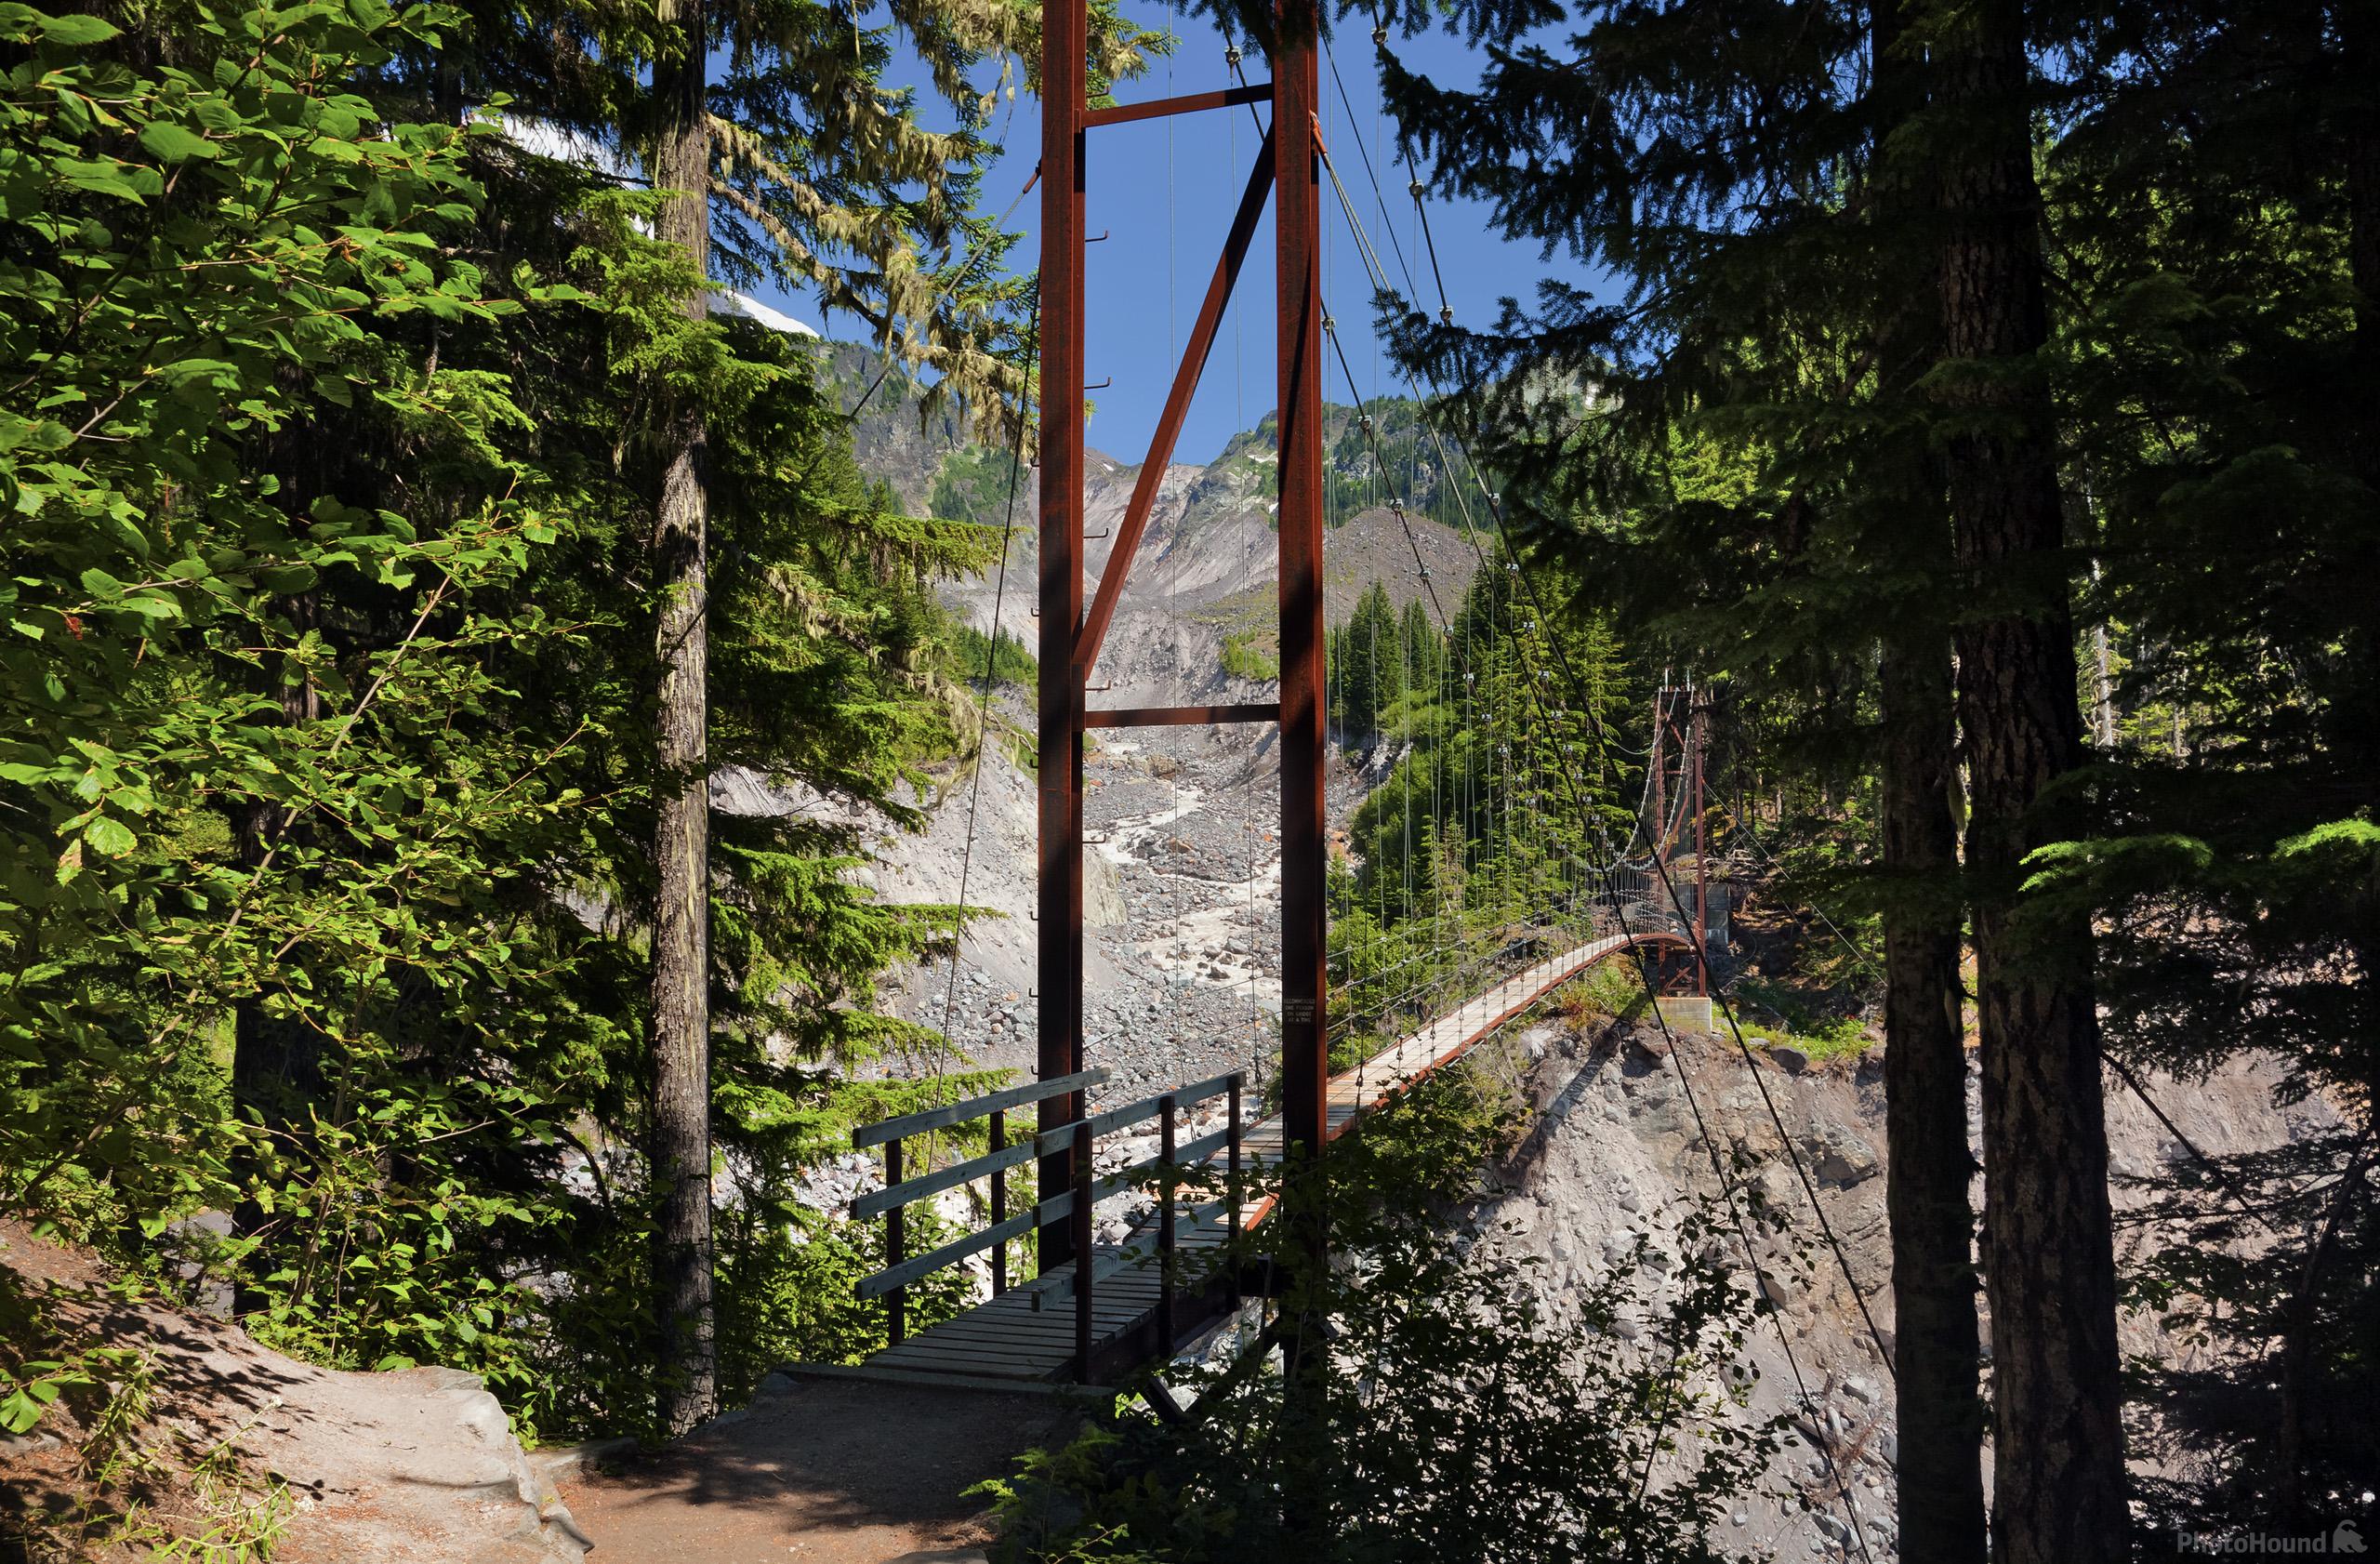 Image of Tahoma Creek Bridge, Mount Rainier National Park by T. Kirkendall and V. Spring